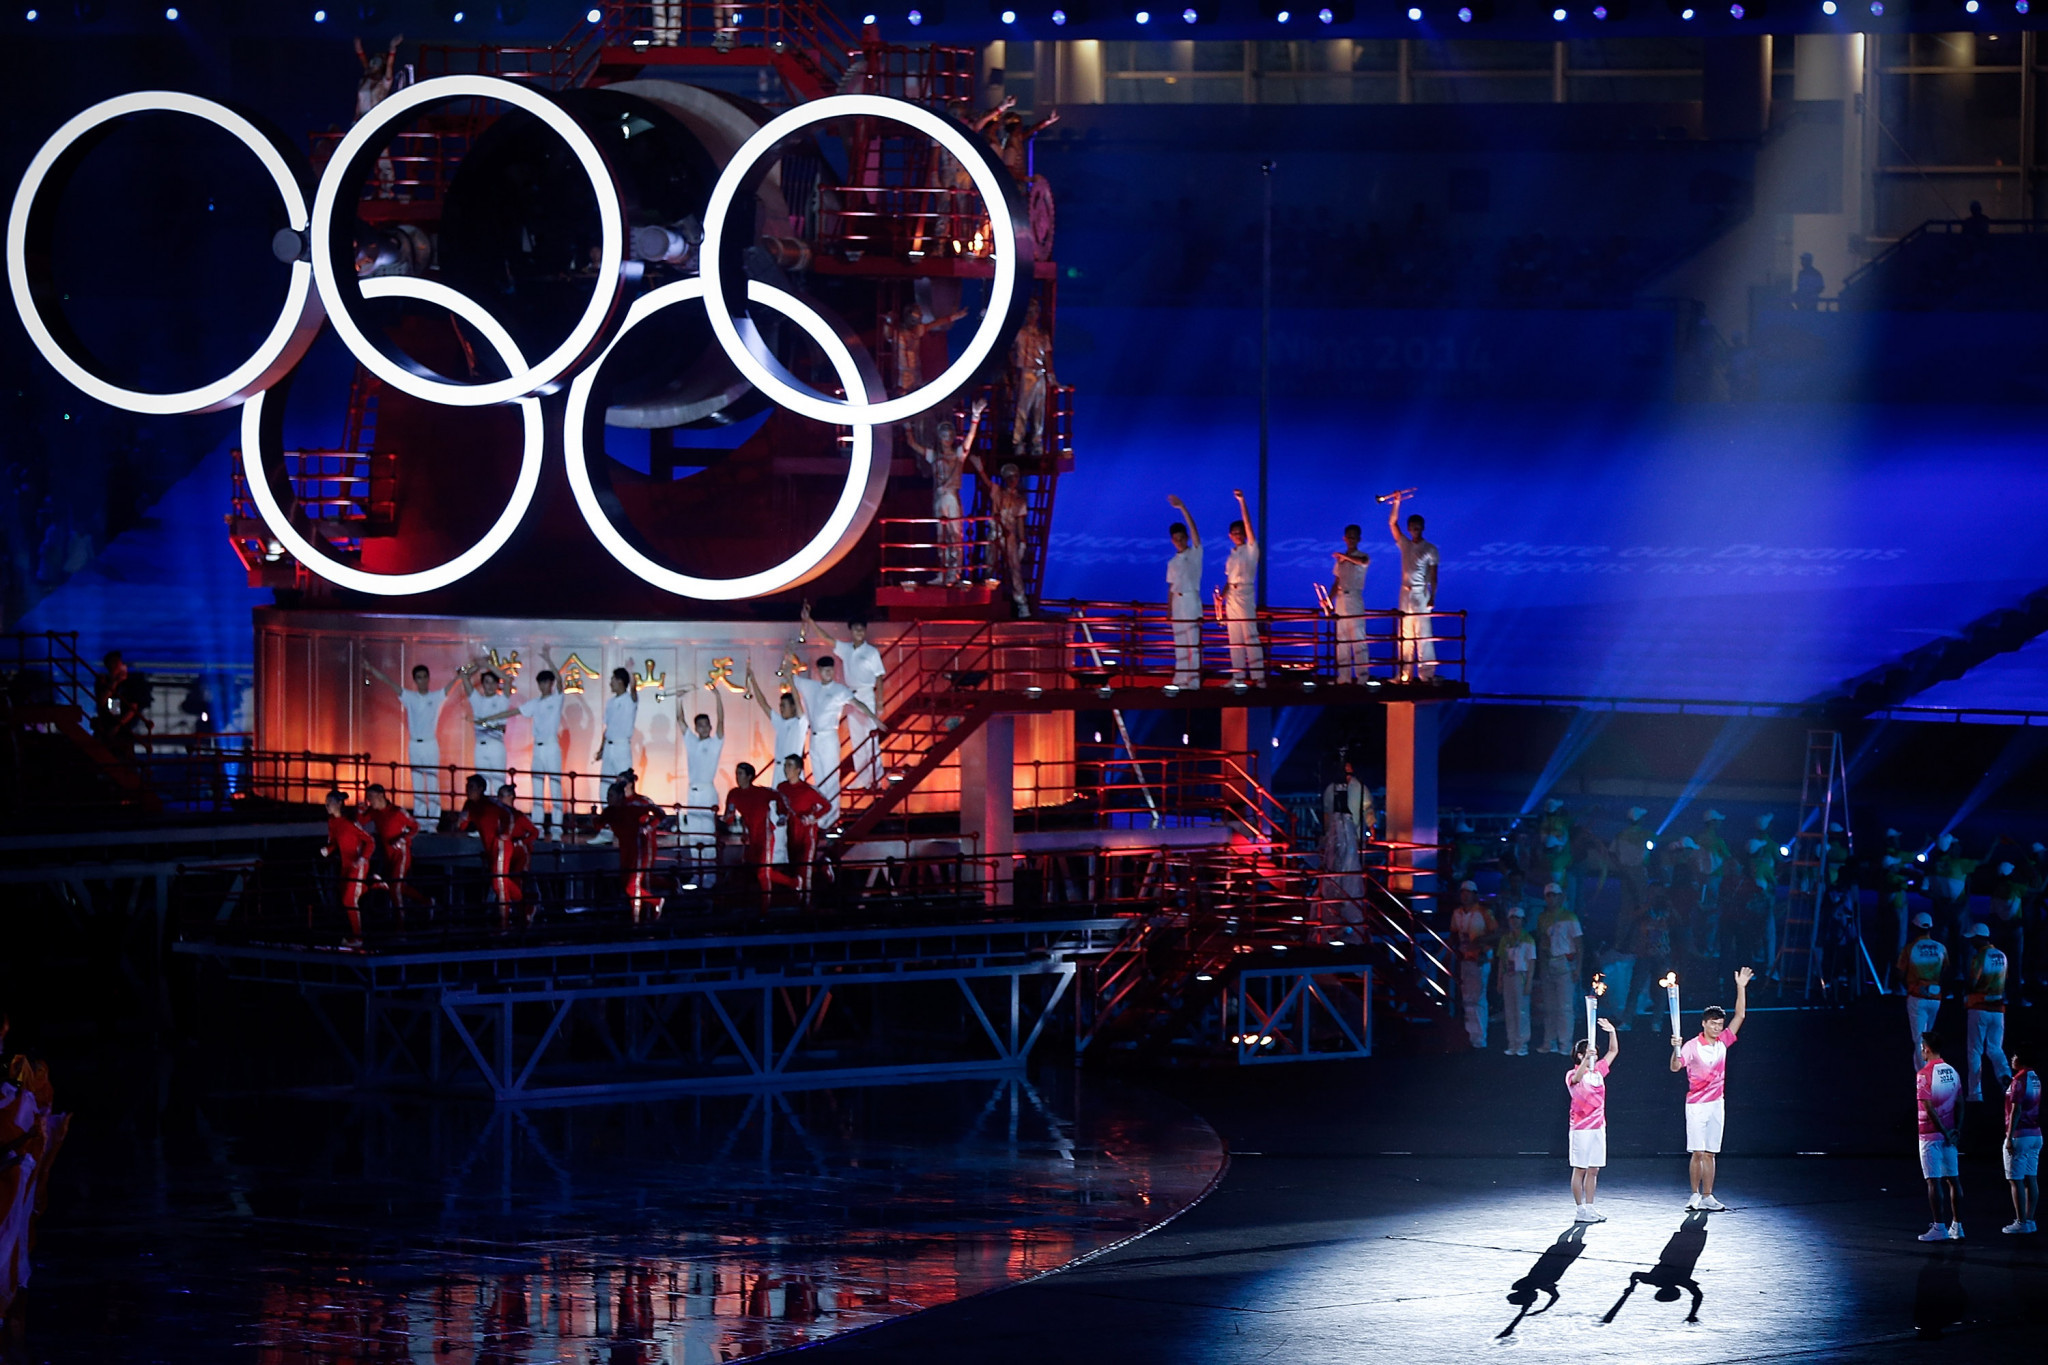 Nanjing hosted the Youth Olympic Games in 2014 ©Getty Images